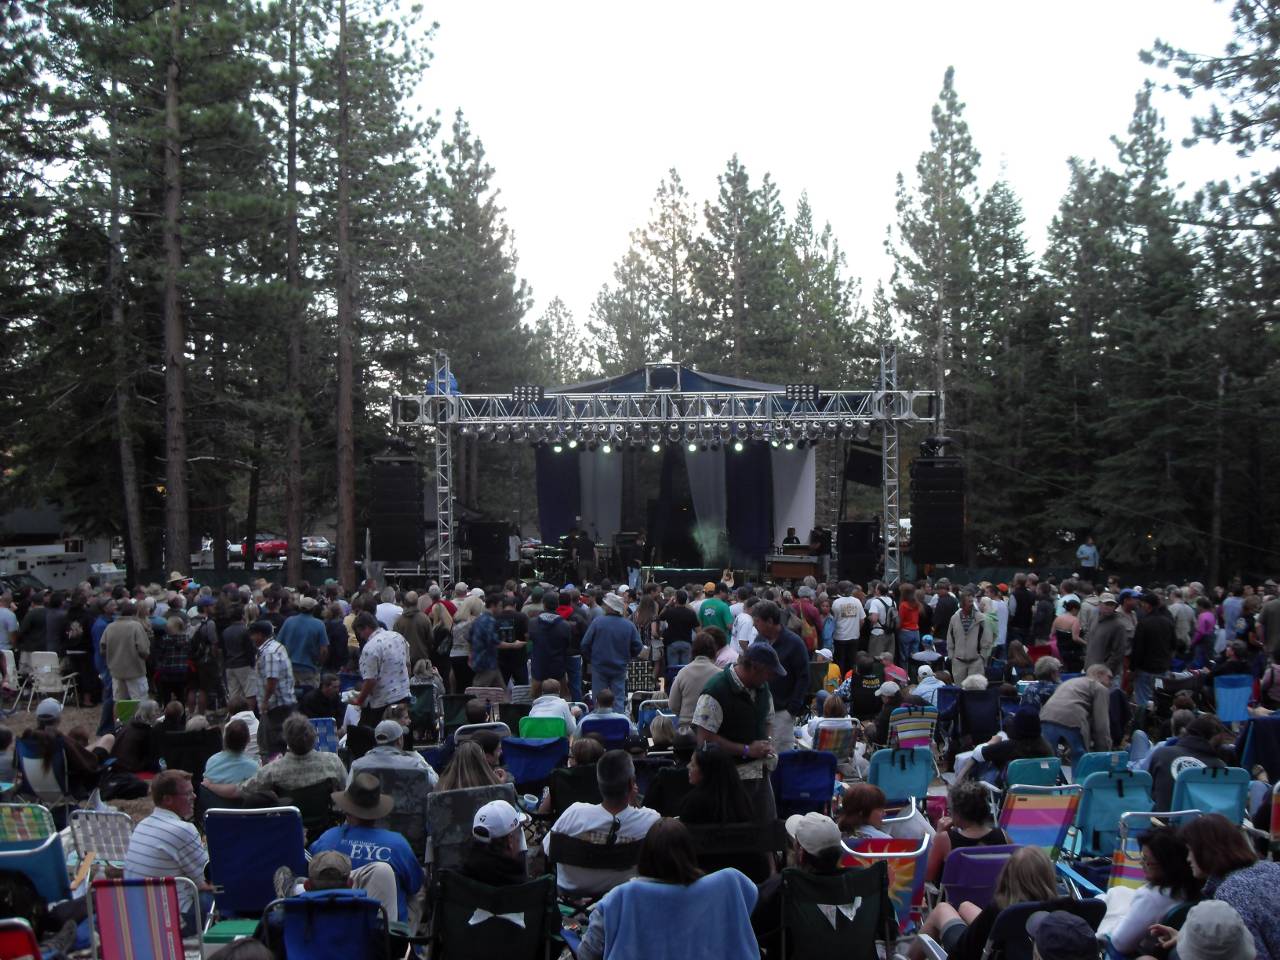 Setting up the stage for the headliners, Beer and Blues Festival, Mammoth Lakes